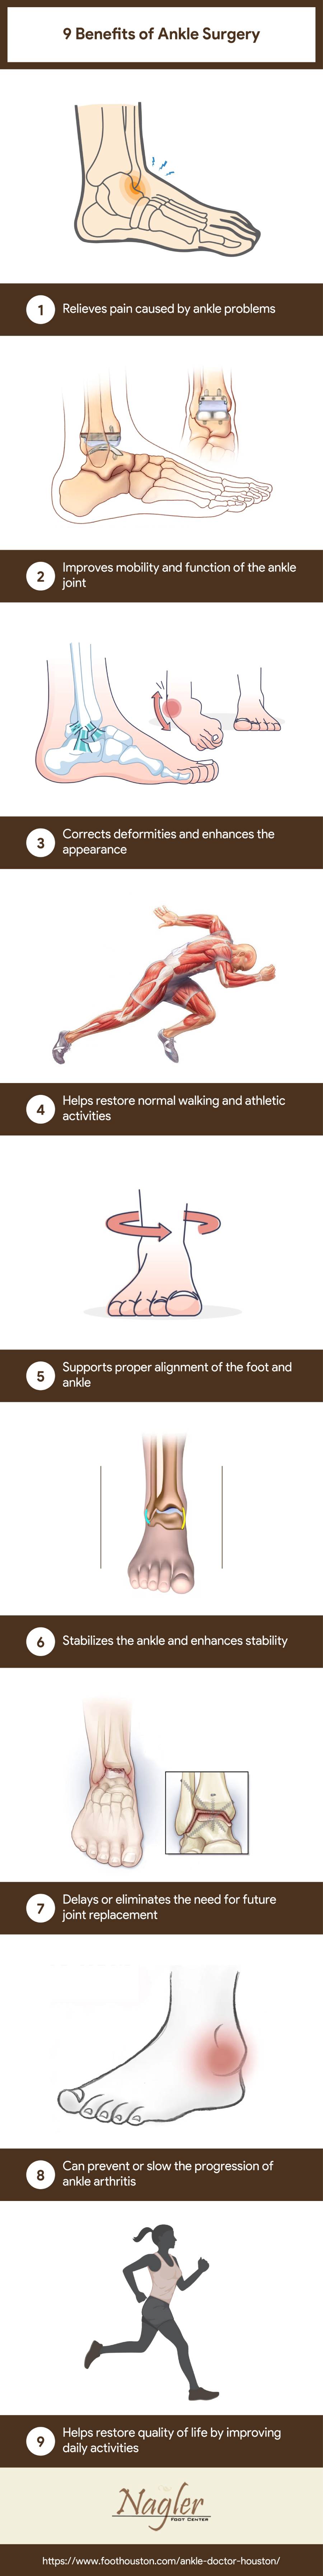 Benefits of Ankle Surgery